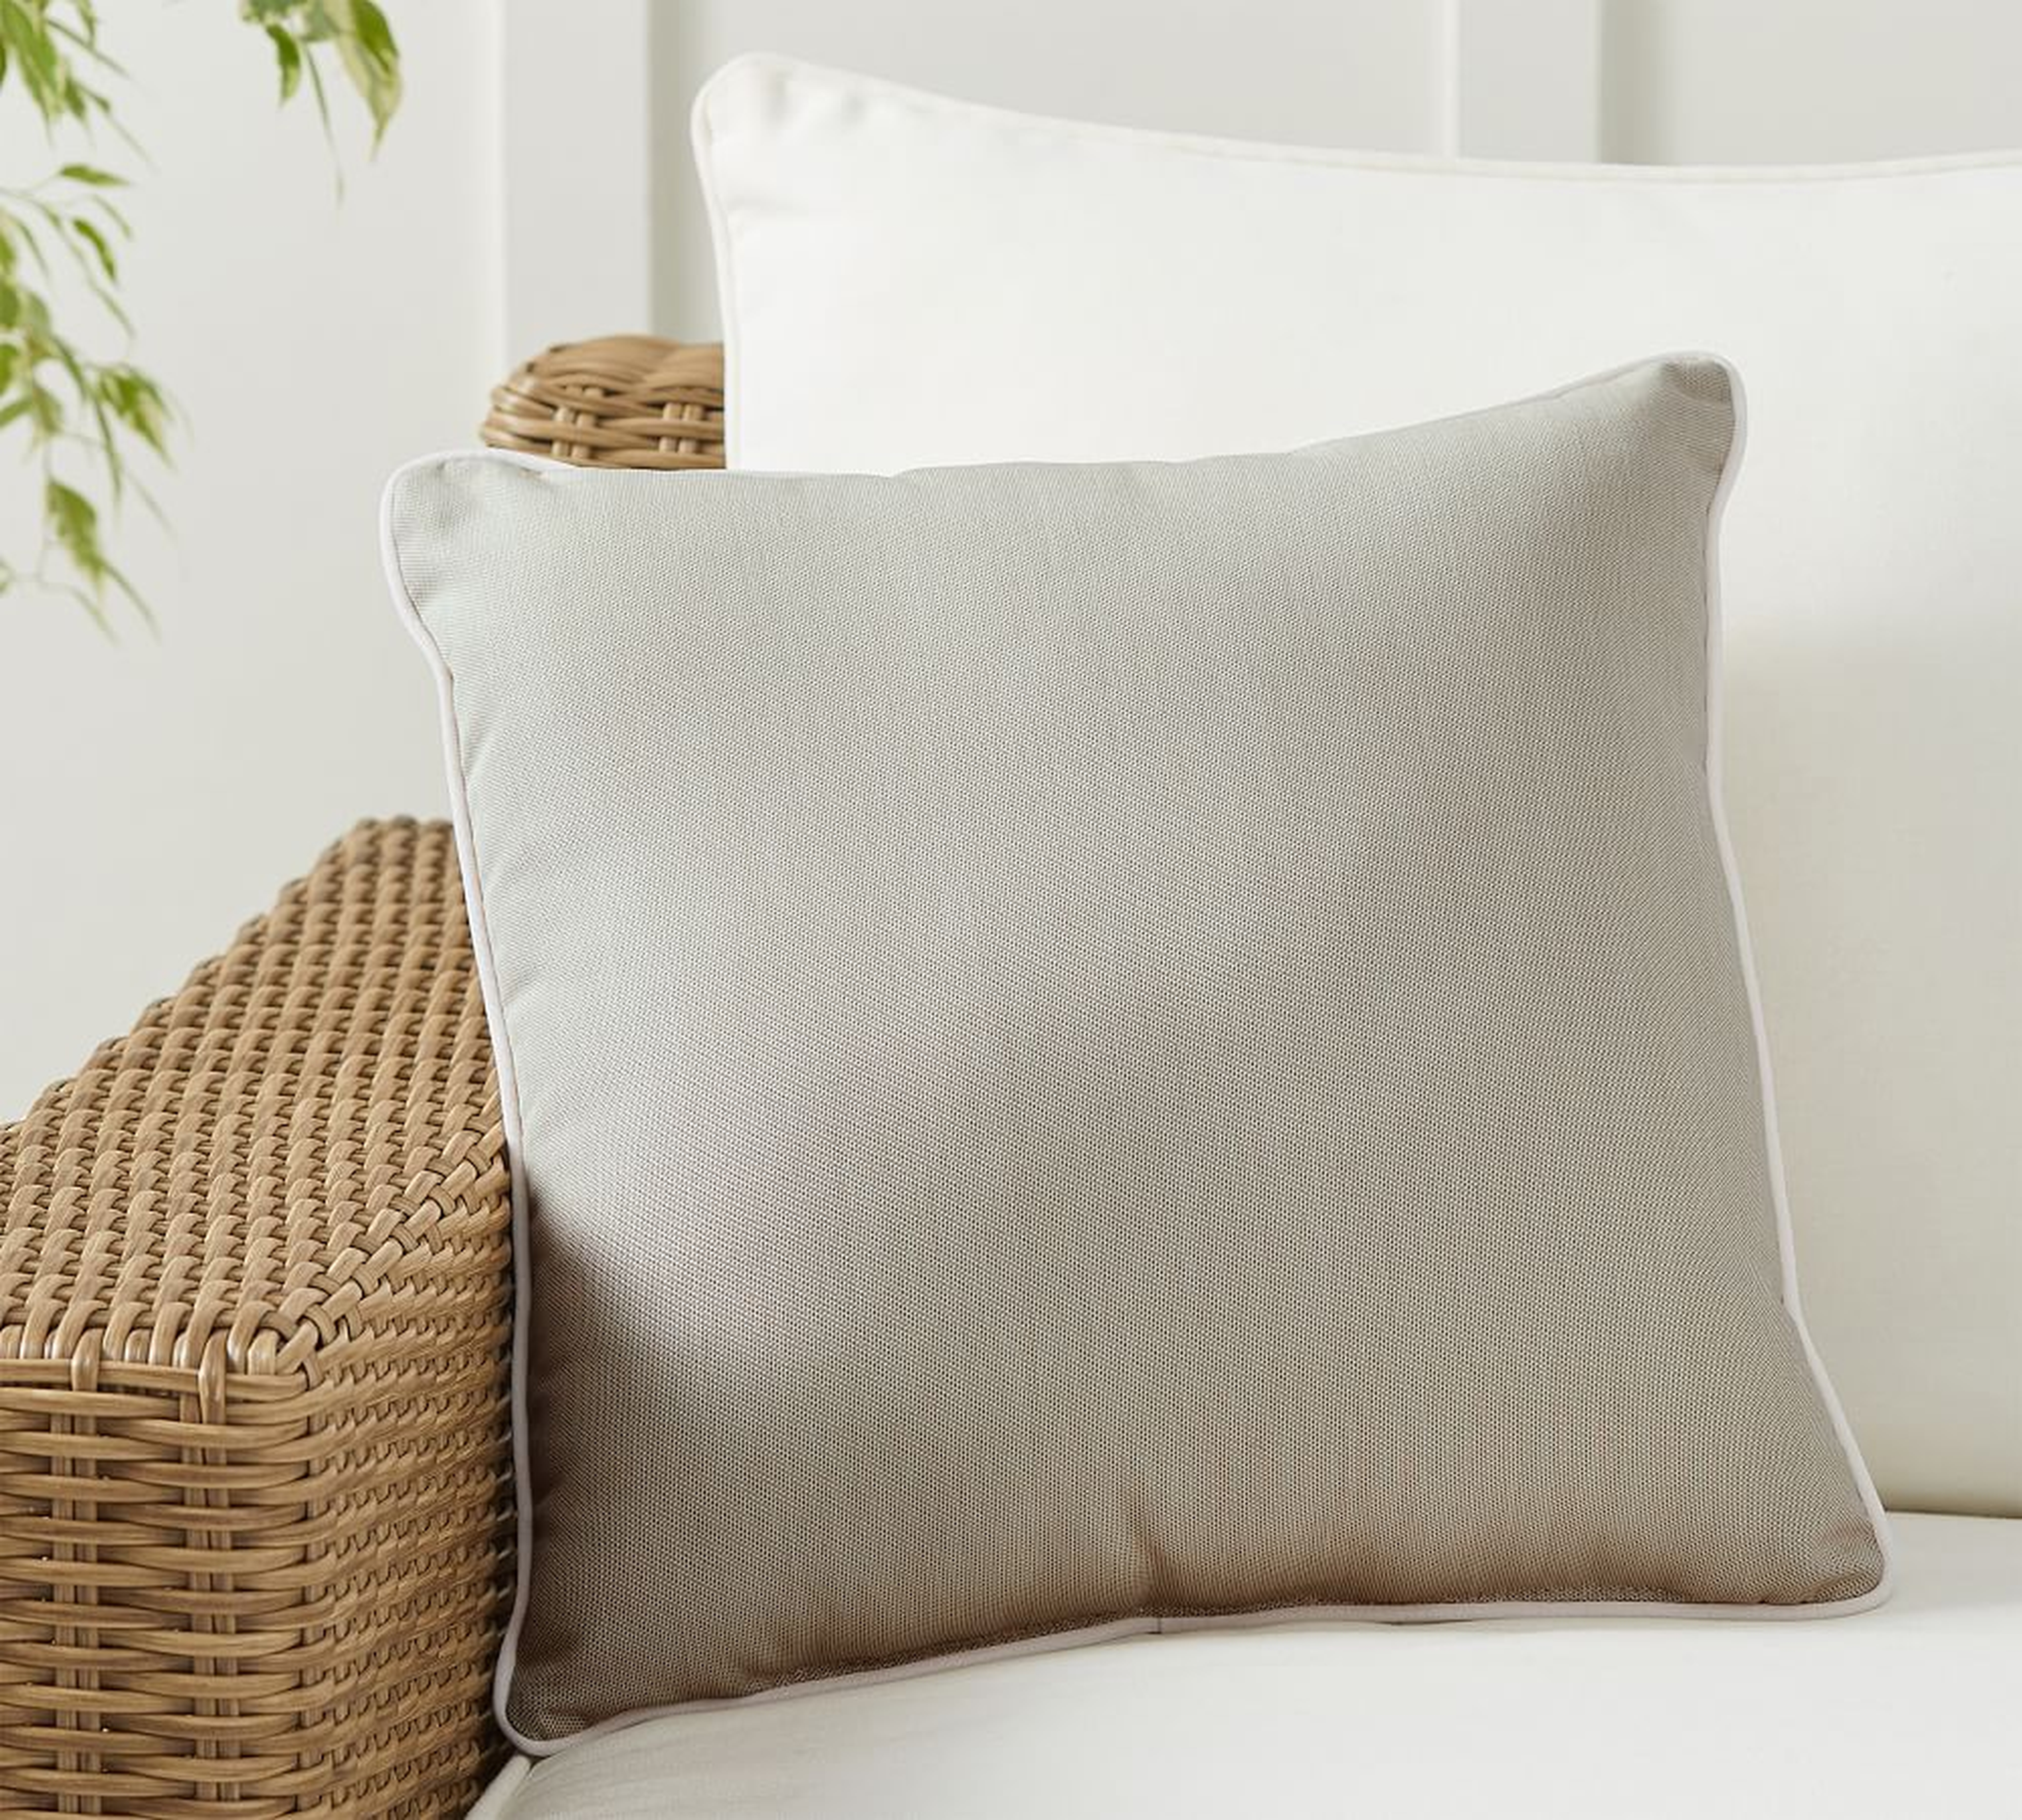 Sunbrella(R) Contrast Piped Solid Indoor/Outdoor Pillow, 18 x 18", Ash - Pottery Barn